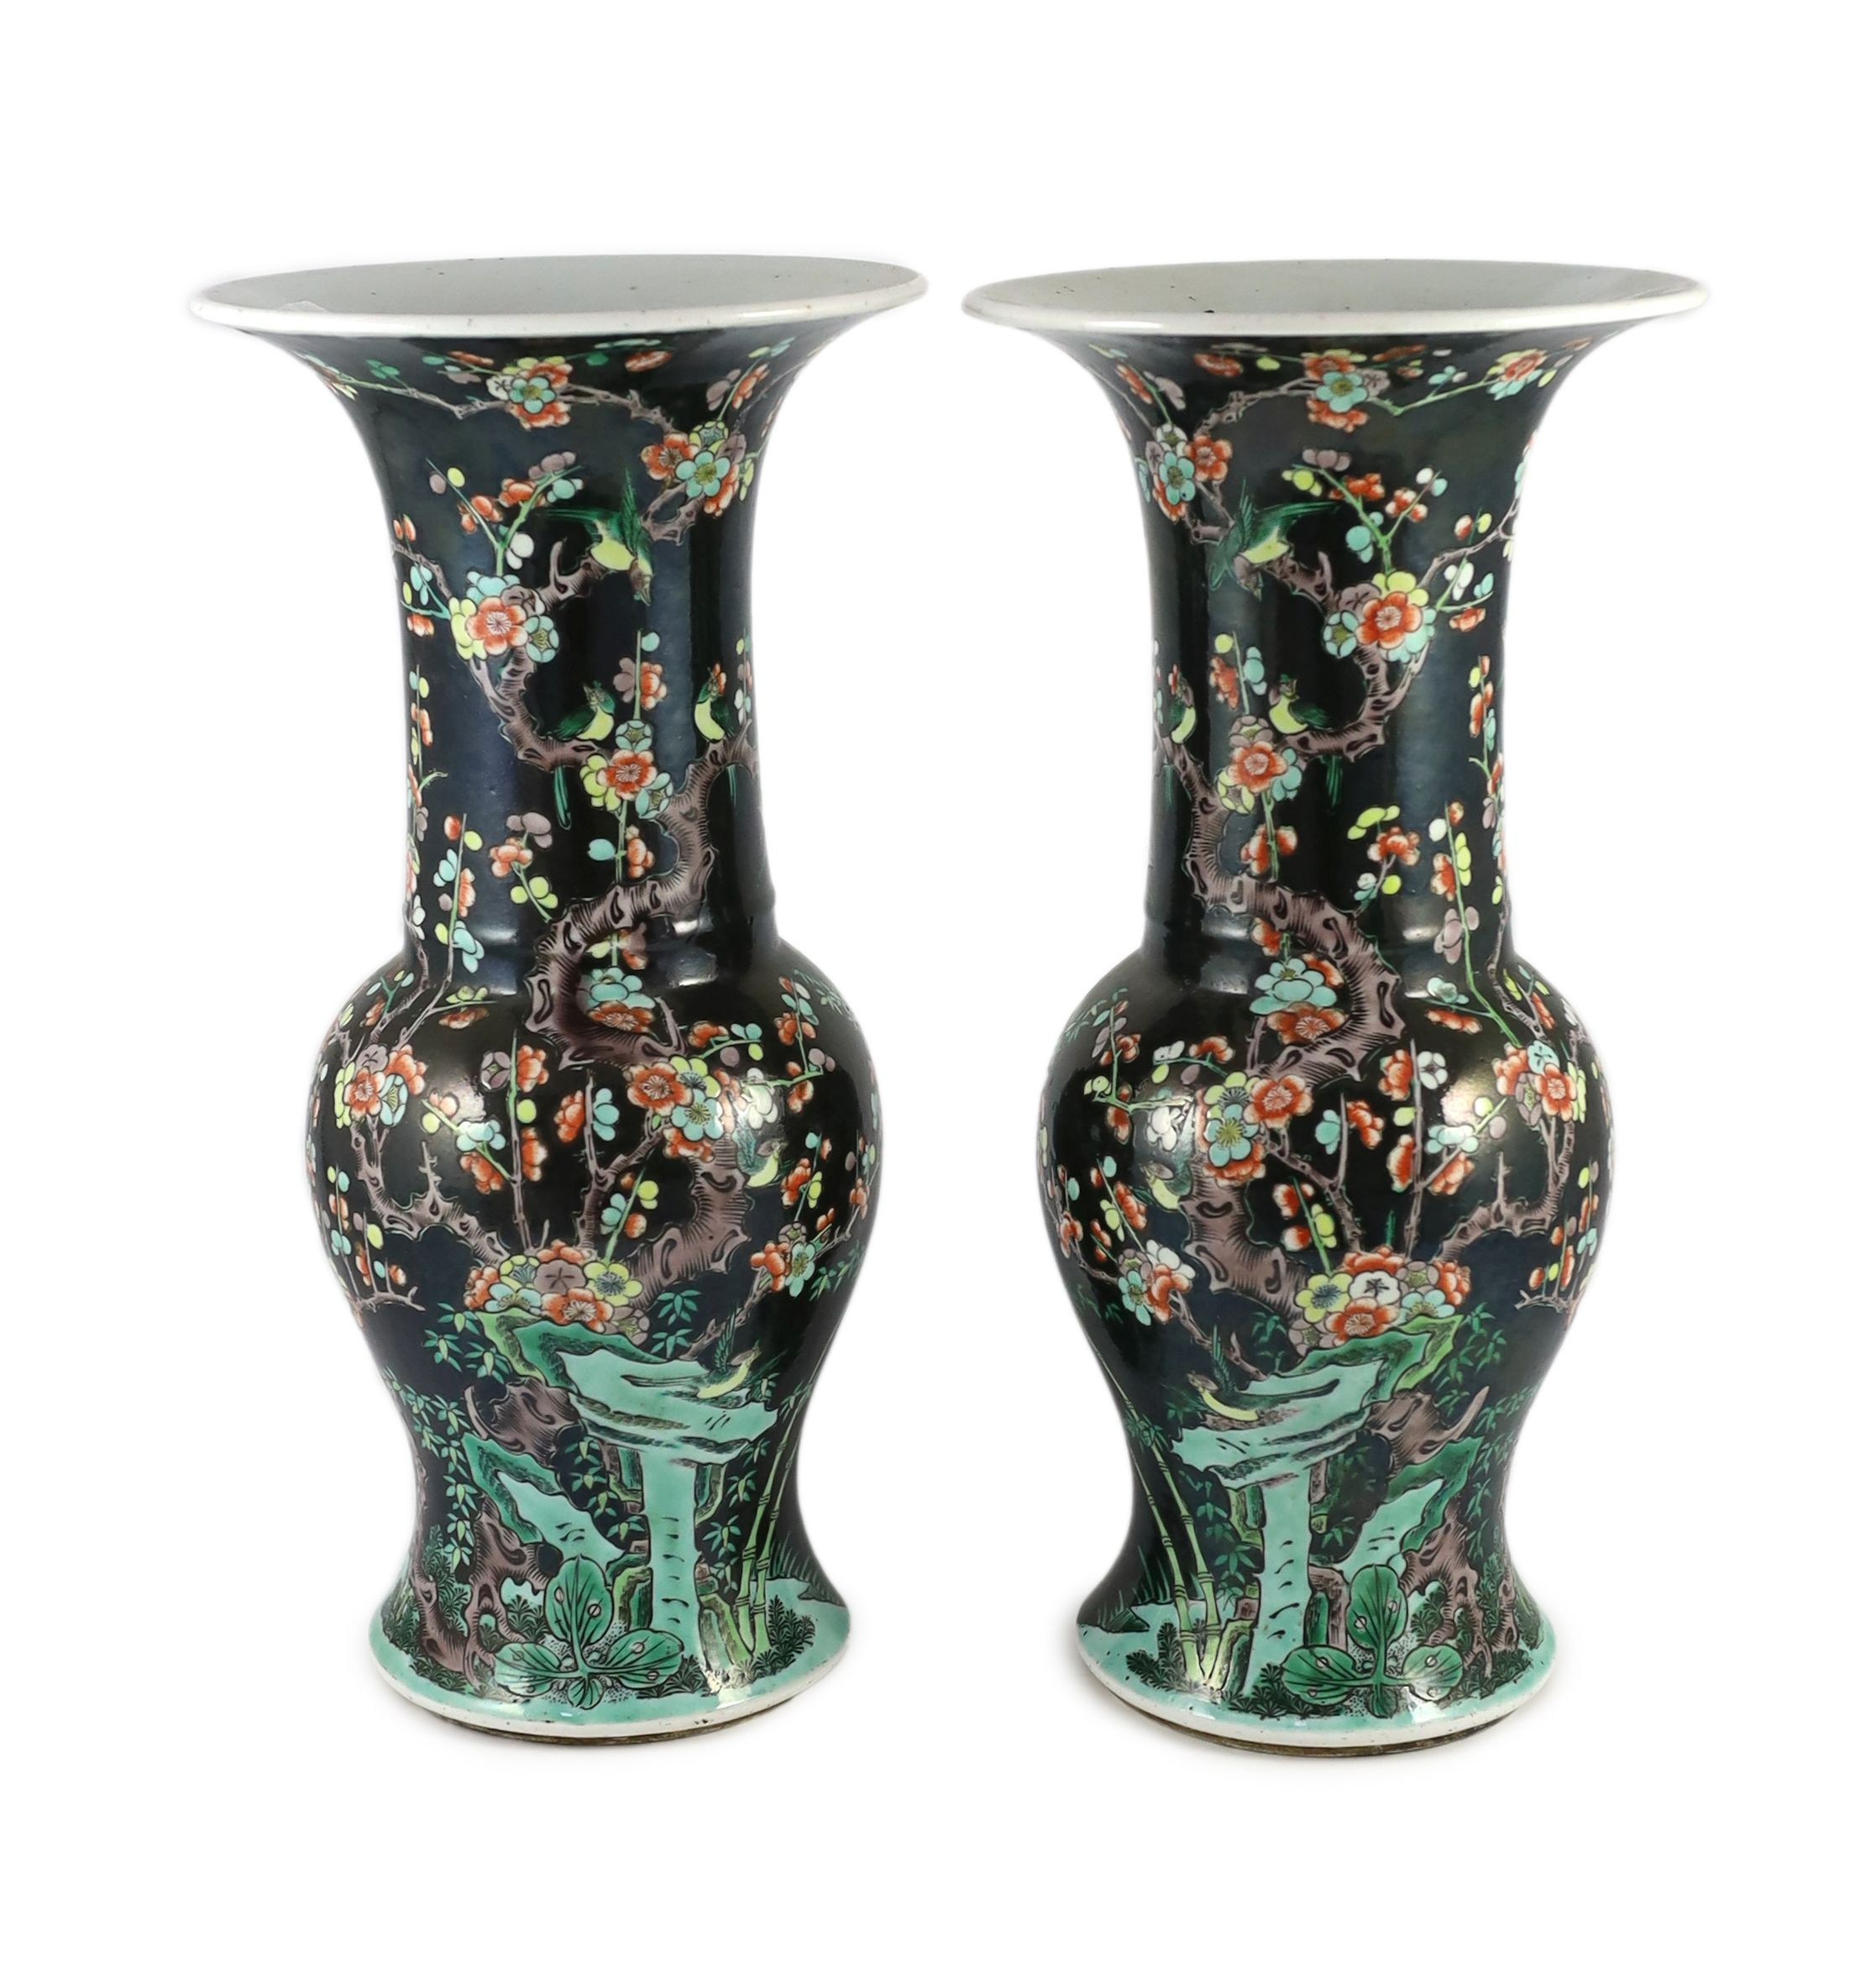 A pair of large Chinese famille noire yen-yen vases, six character Kangxi marks but 19th century, 44 cm high